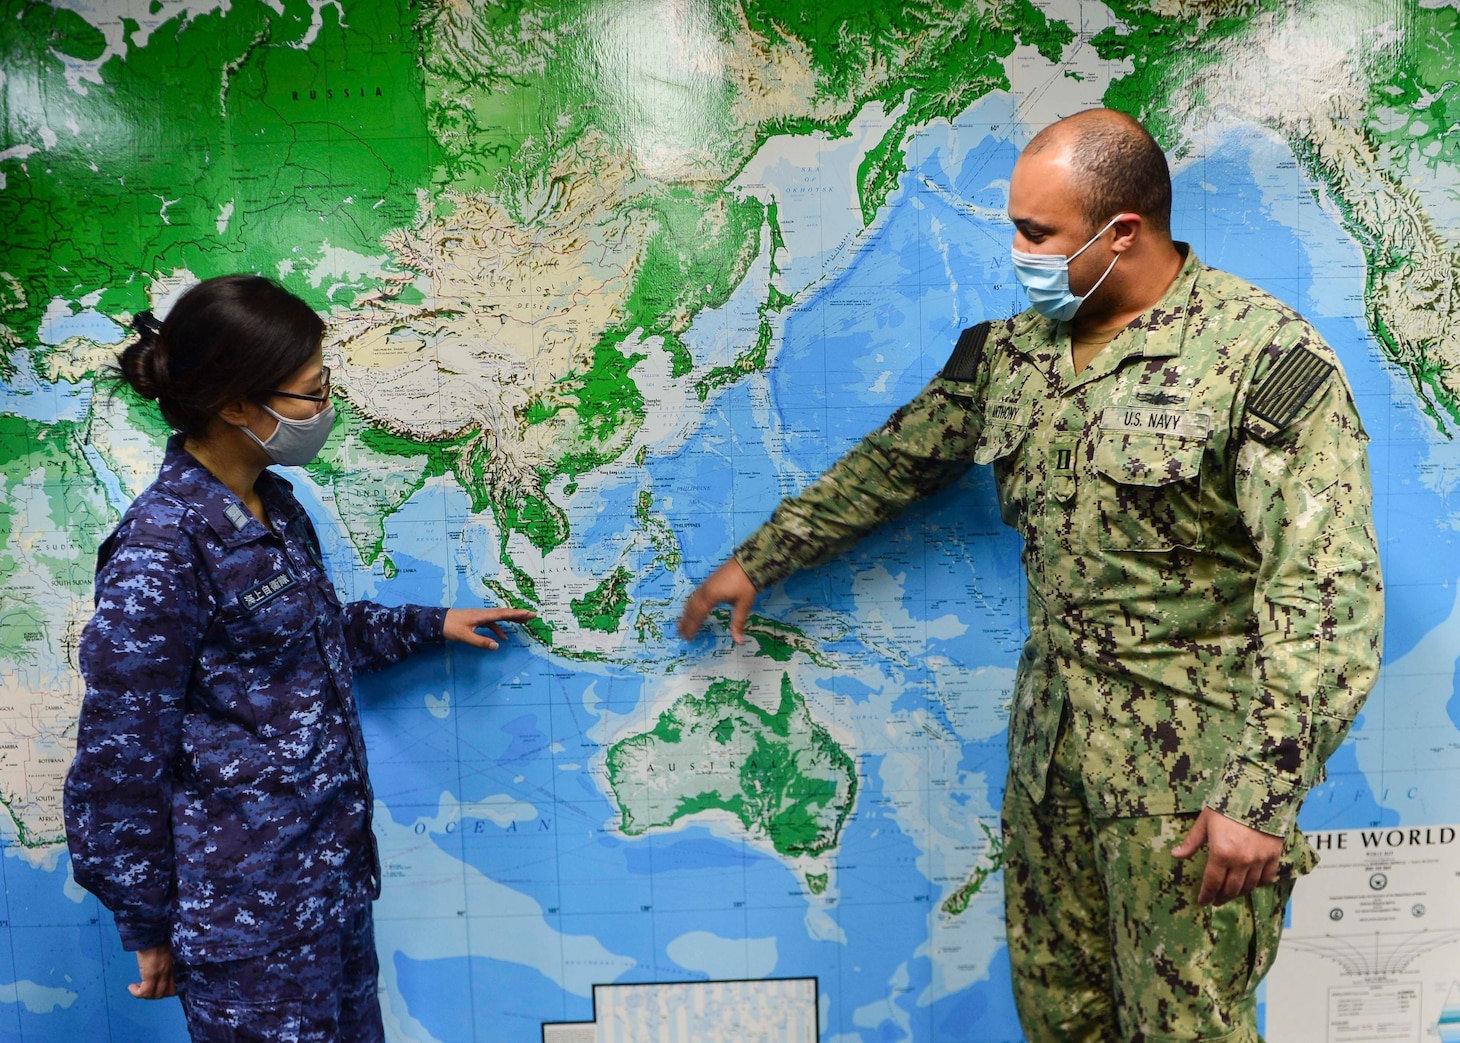 SINGAPORE (May 5, 2021) – Japan Maritime Self-Defense Force (JMSDF) Lt. Cmdr. Yoko Ukegawa, JMSDF liaison officer at Commander, Logistics Group Western Pacific (COMLOG WESTPAC), and U.S. Navy Lt. William Anthony, assistant replenishment officer with COMLOG WESTPAC, discuss potential replenishment-at-sea locations in the COMLOG WESTPAC conference room. (U.S. Navy photo by Mass Communication Specialist 1st Class Greg Johnson)